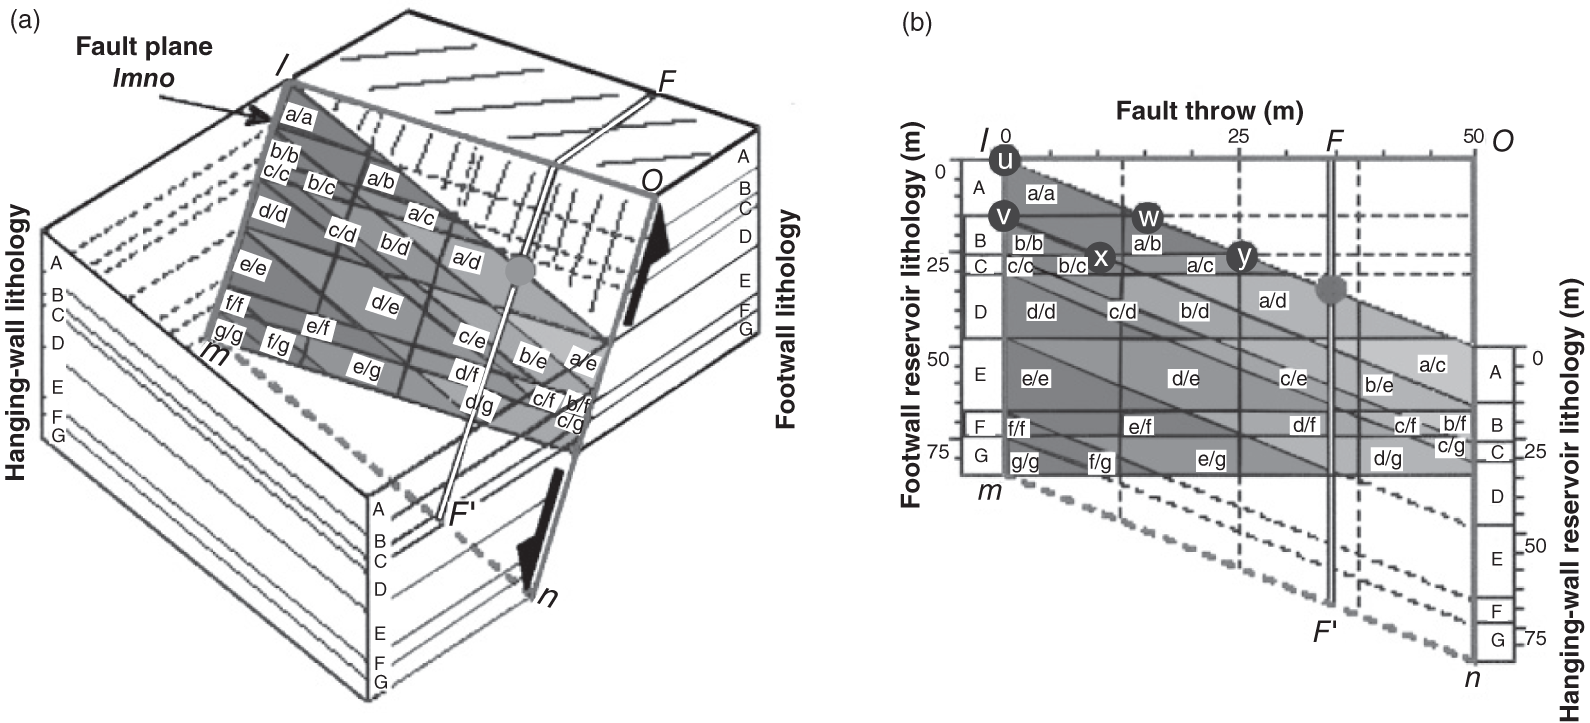 Juxtaposition diagrams. (a) A 3D fault with varying displacement along its length. (b) Diagram considered a “see-through” fault. Footwall stratigraphic units (unit C) intersect with the fault (the footwall cutoffs) from behind the diagram plane, and the hanging-wall cutoffs intersect from in front of the diagram plane.